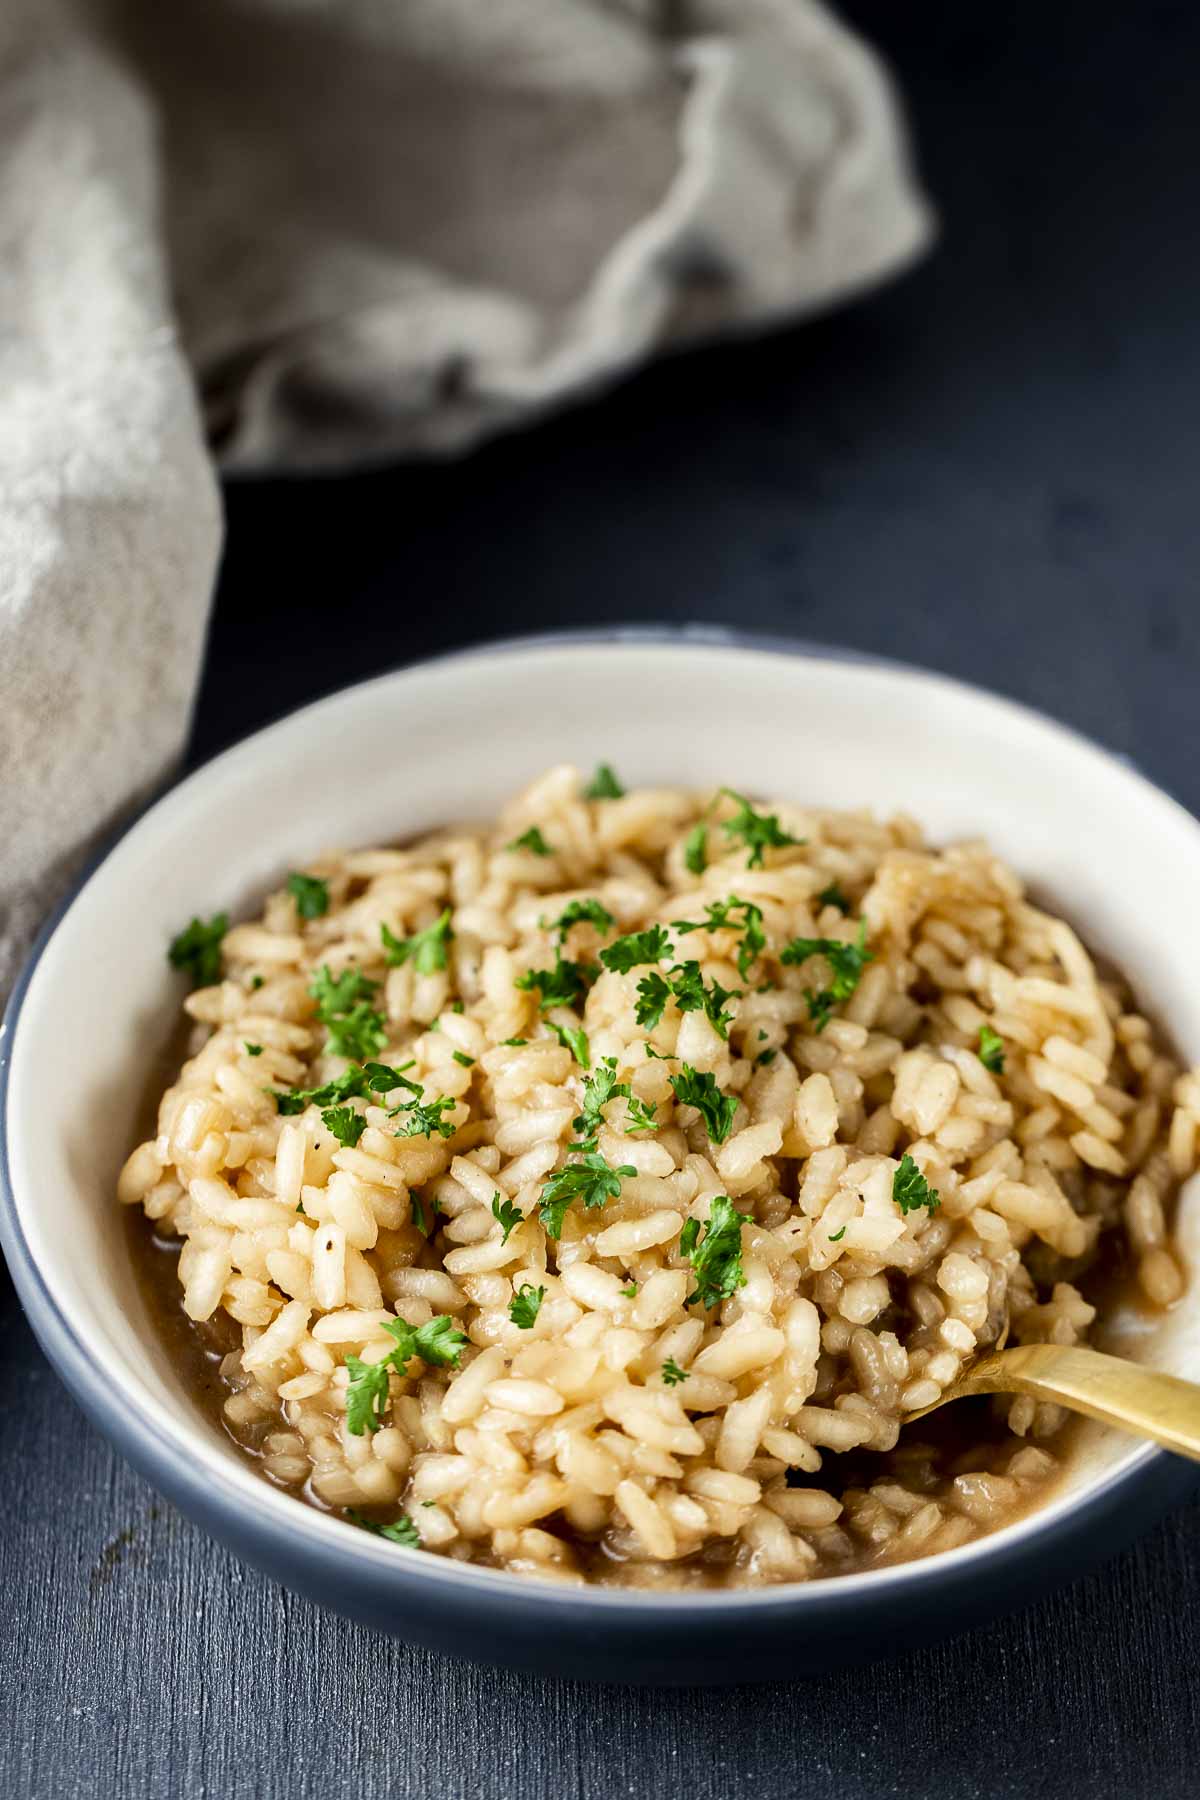 a bowl of risotto garnished with parsley